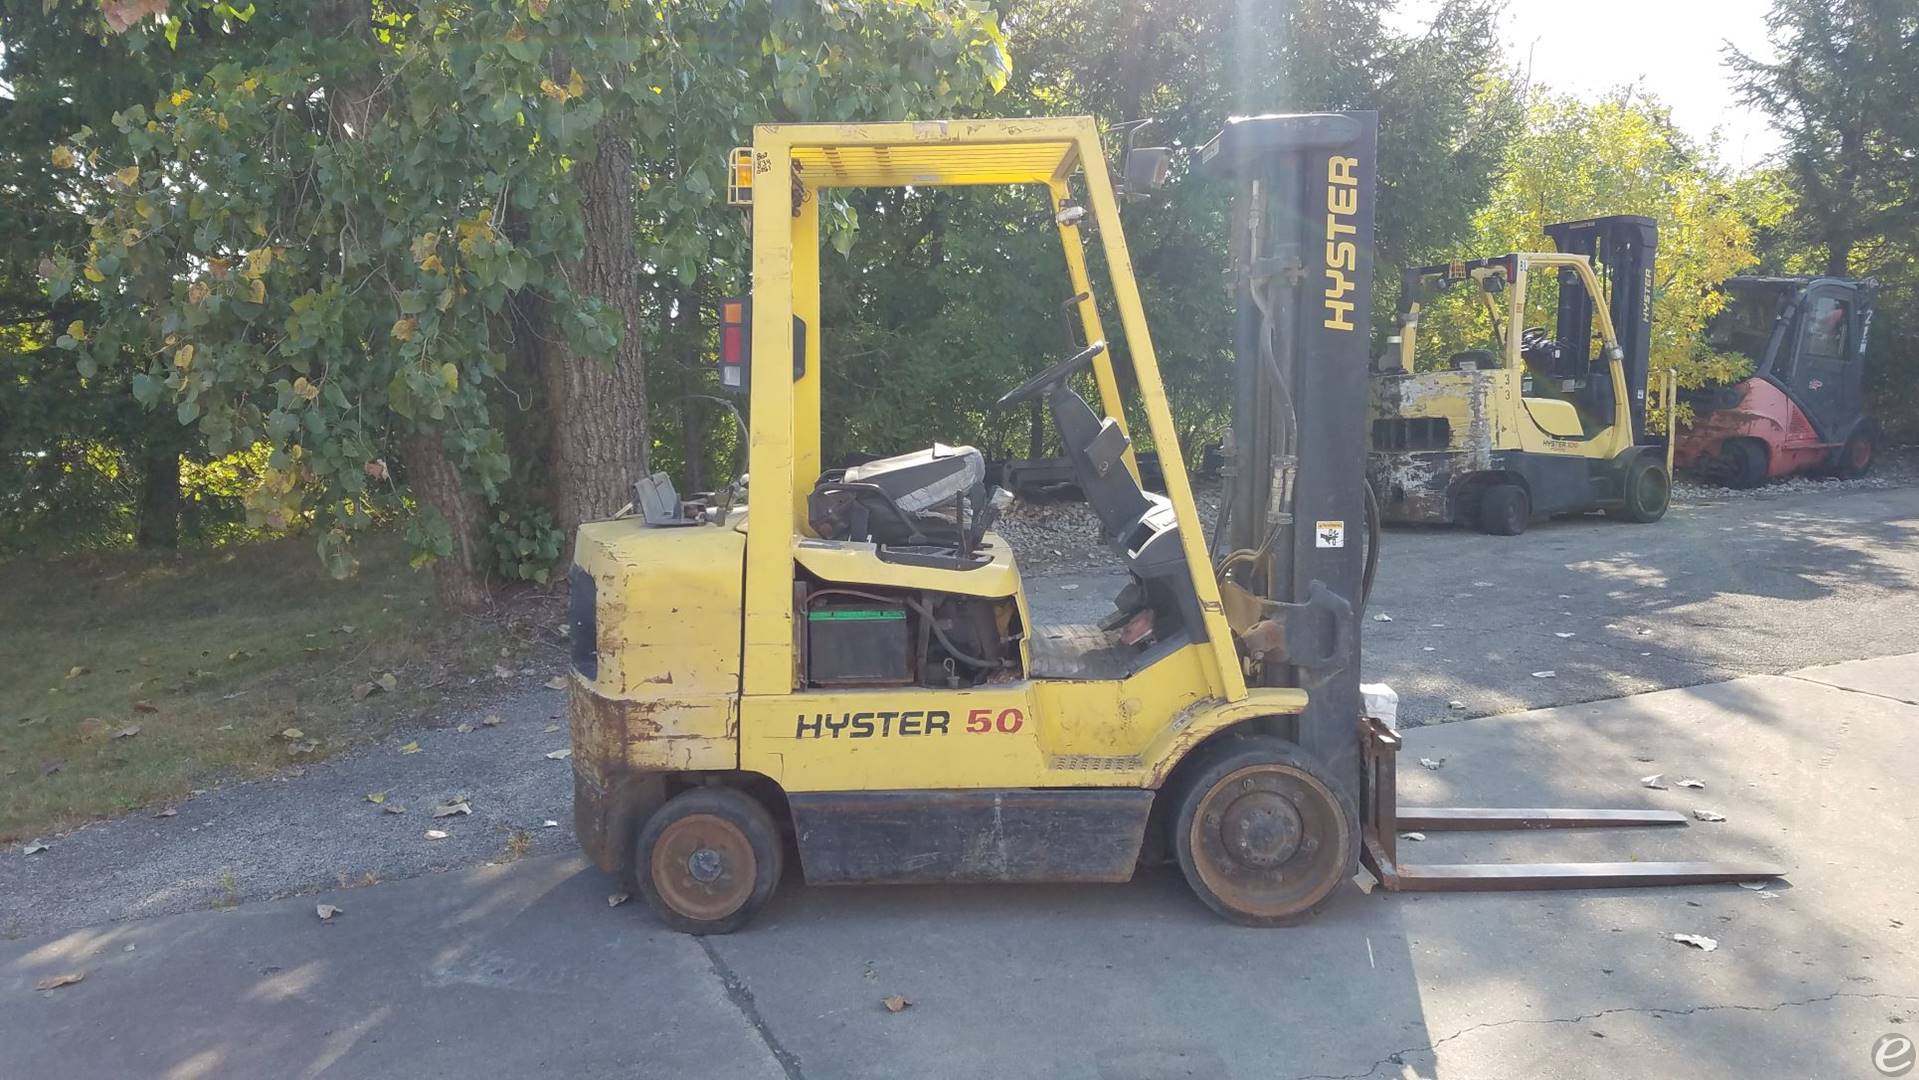 1997 Hyster S50XM